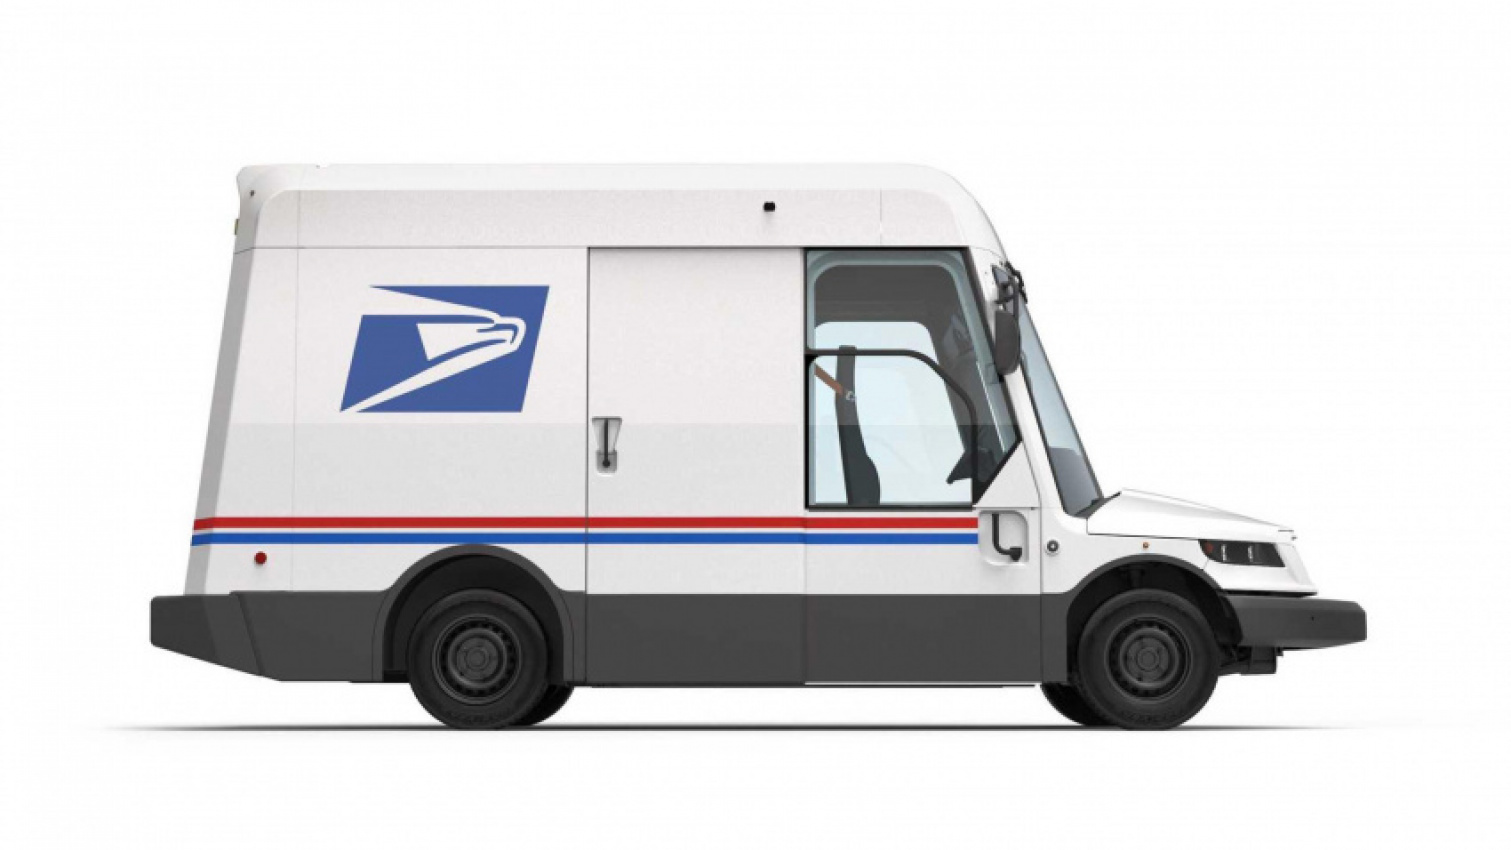 autos, cars, climate, climate change, cop26, climate, cop26, climate change, new usps mail trucks could be put on hold due to climate concerns